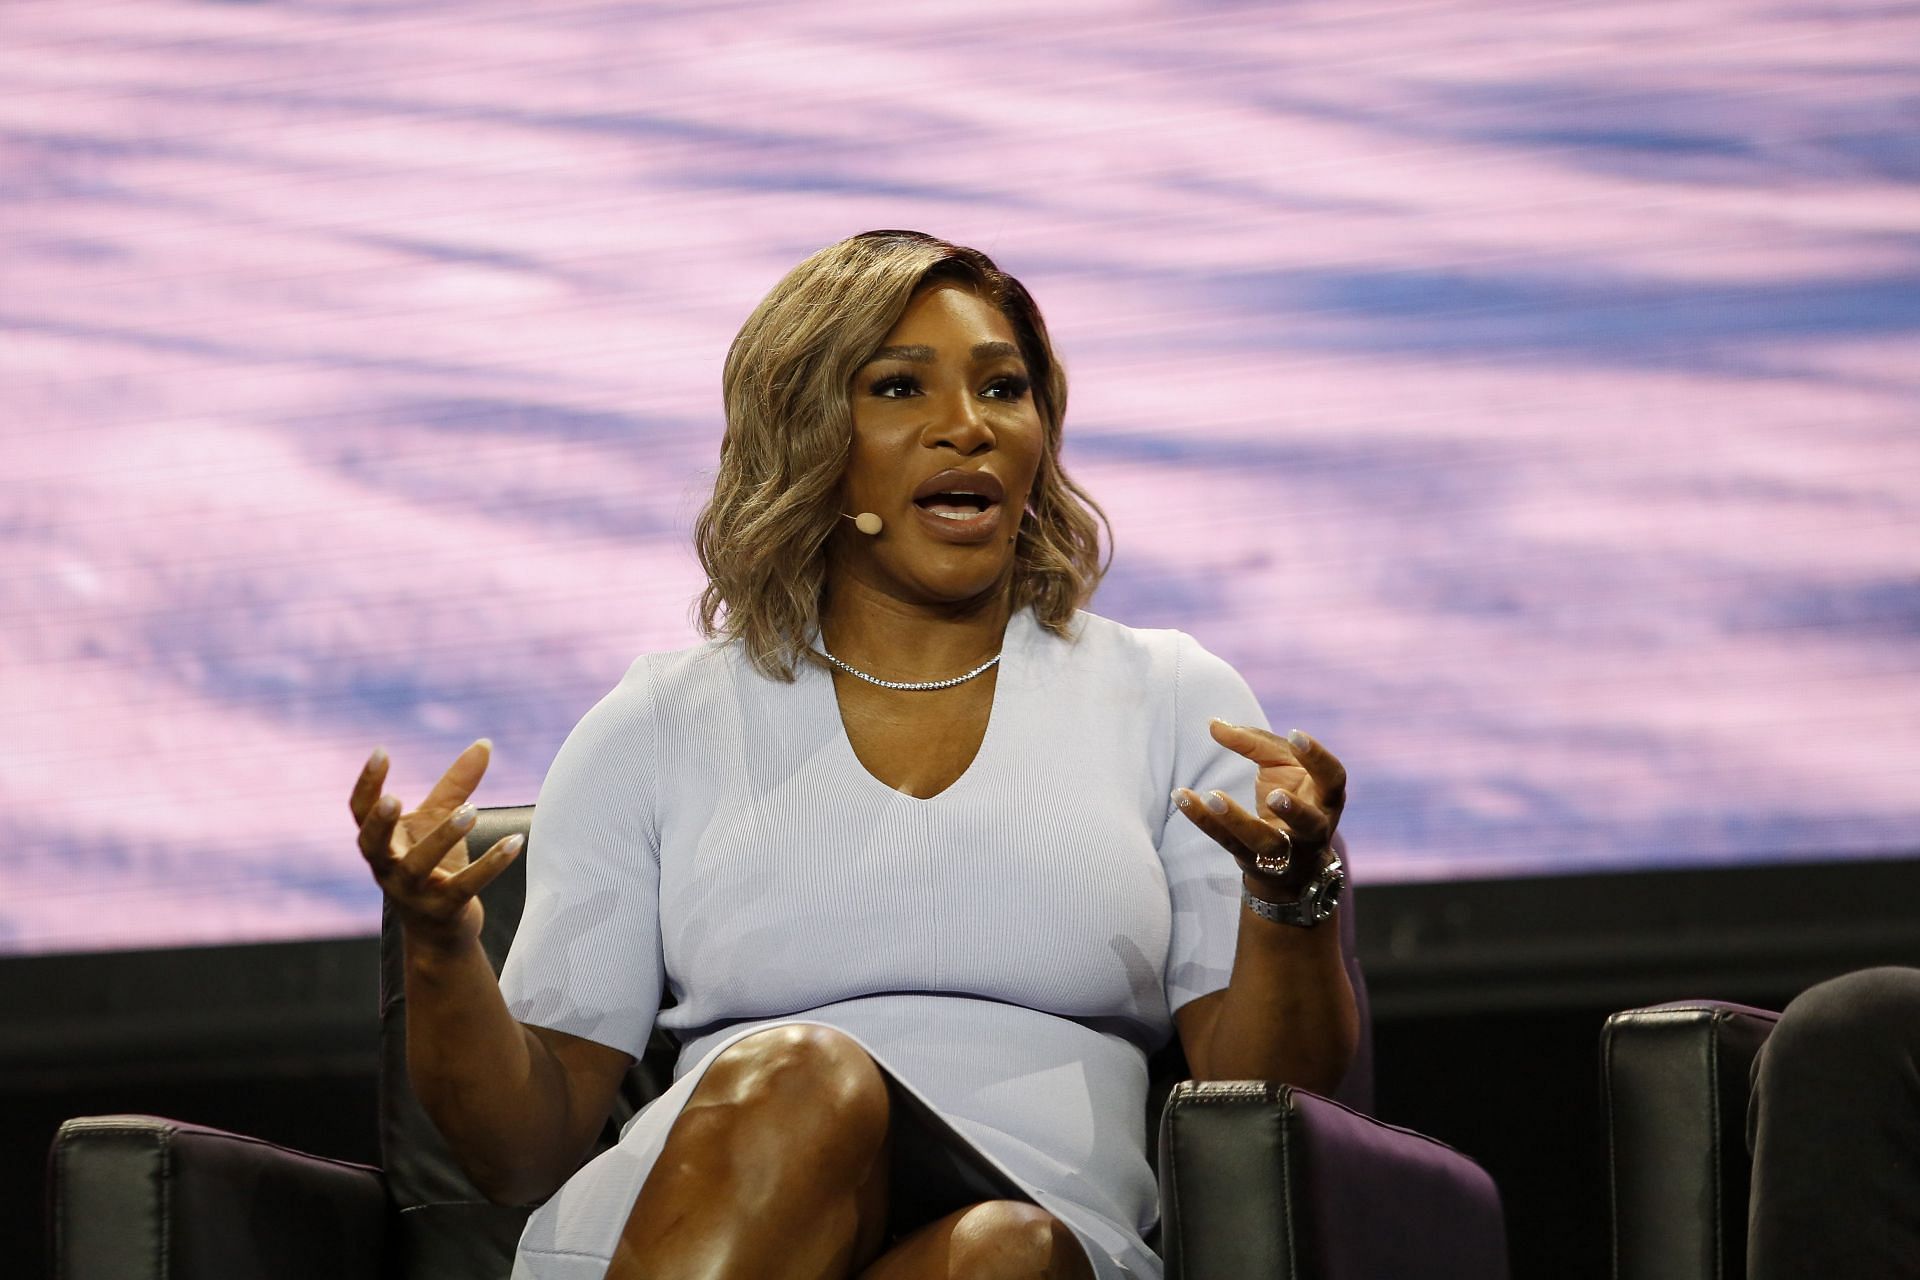 Williams received a lot of criticism for her comments on the Texas School Shooting